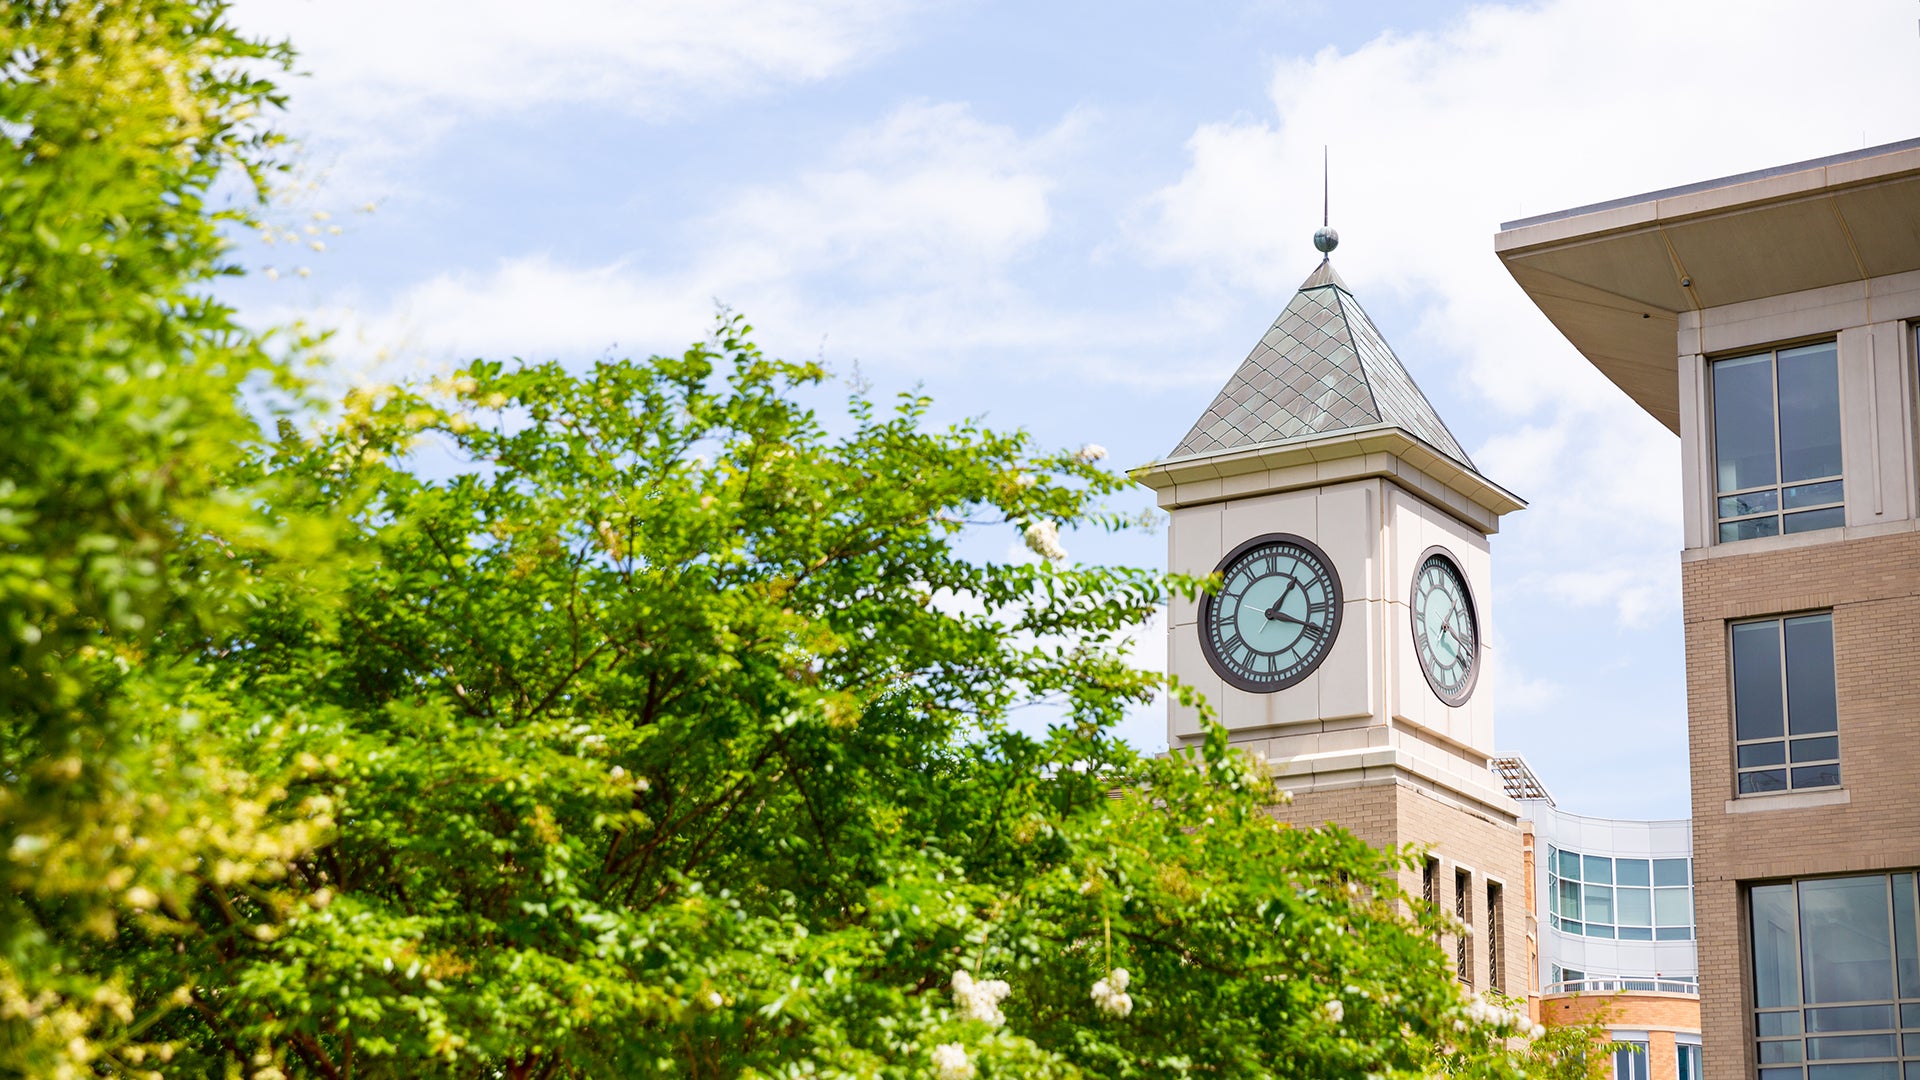 Image of the Georgetown Law Center clock tower behind an image of a tree under blue skies.